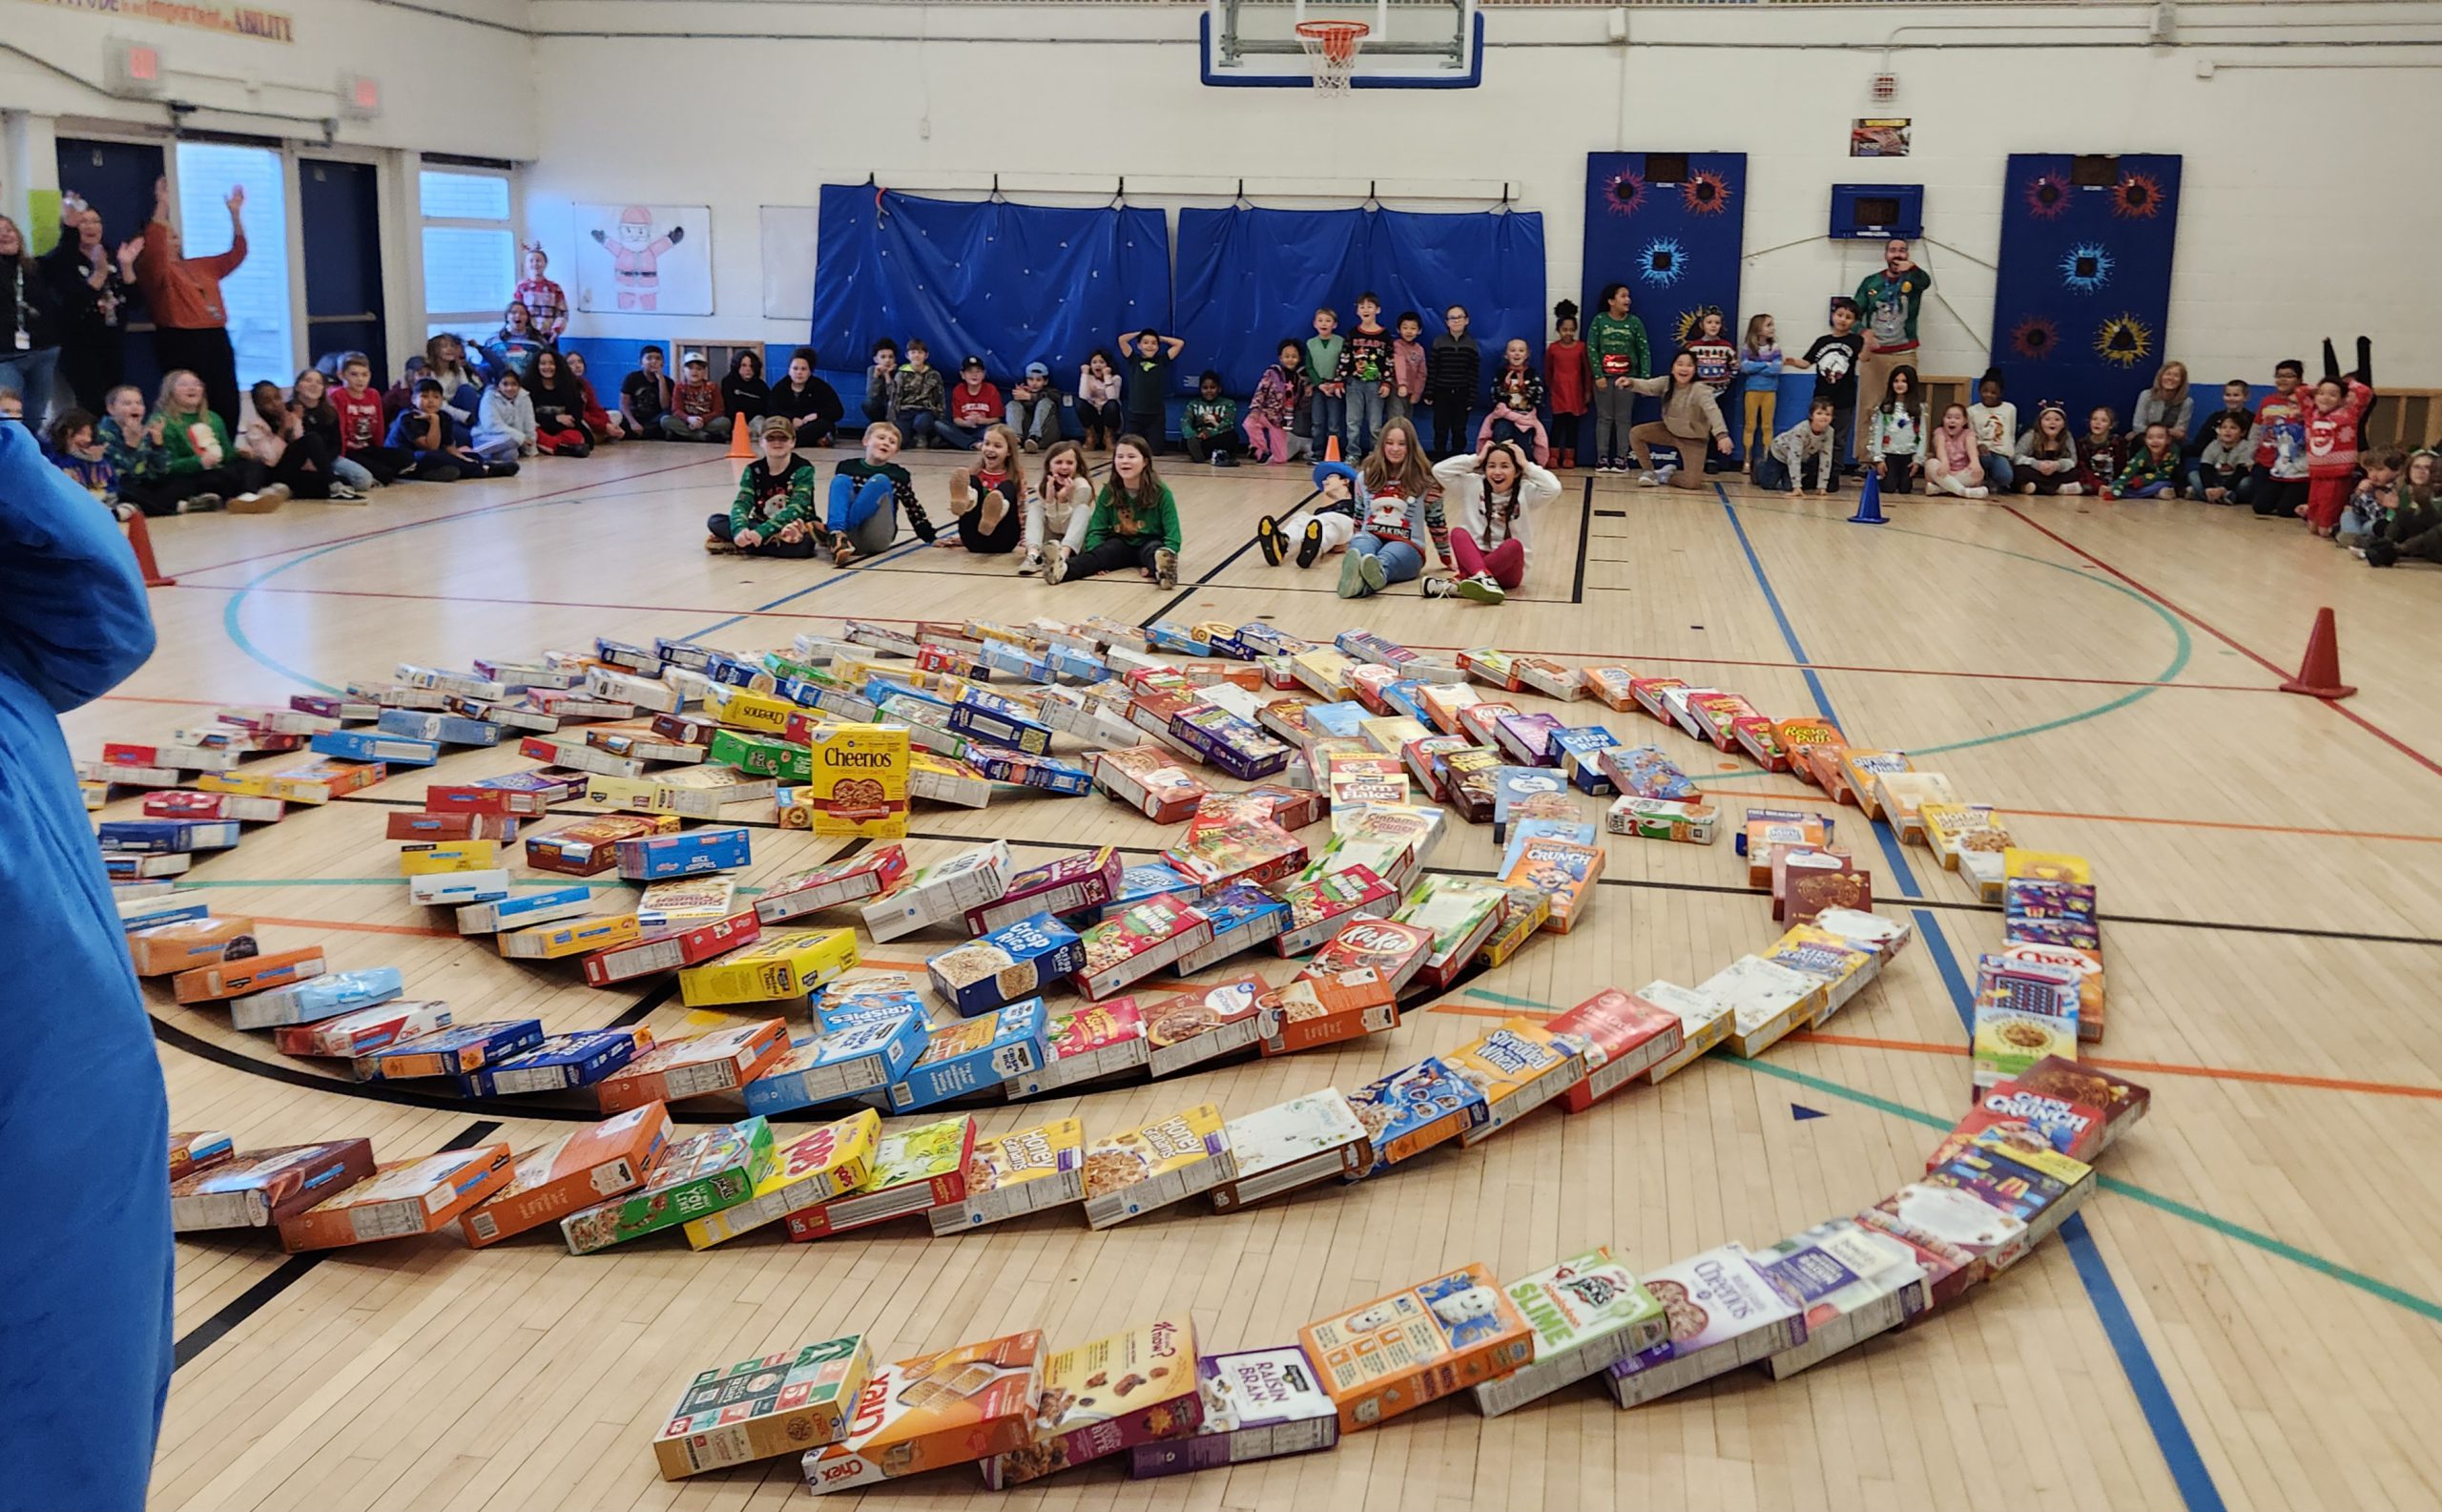 a group of students are seated on the floor of the gym watching cereal boxes fall. 